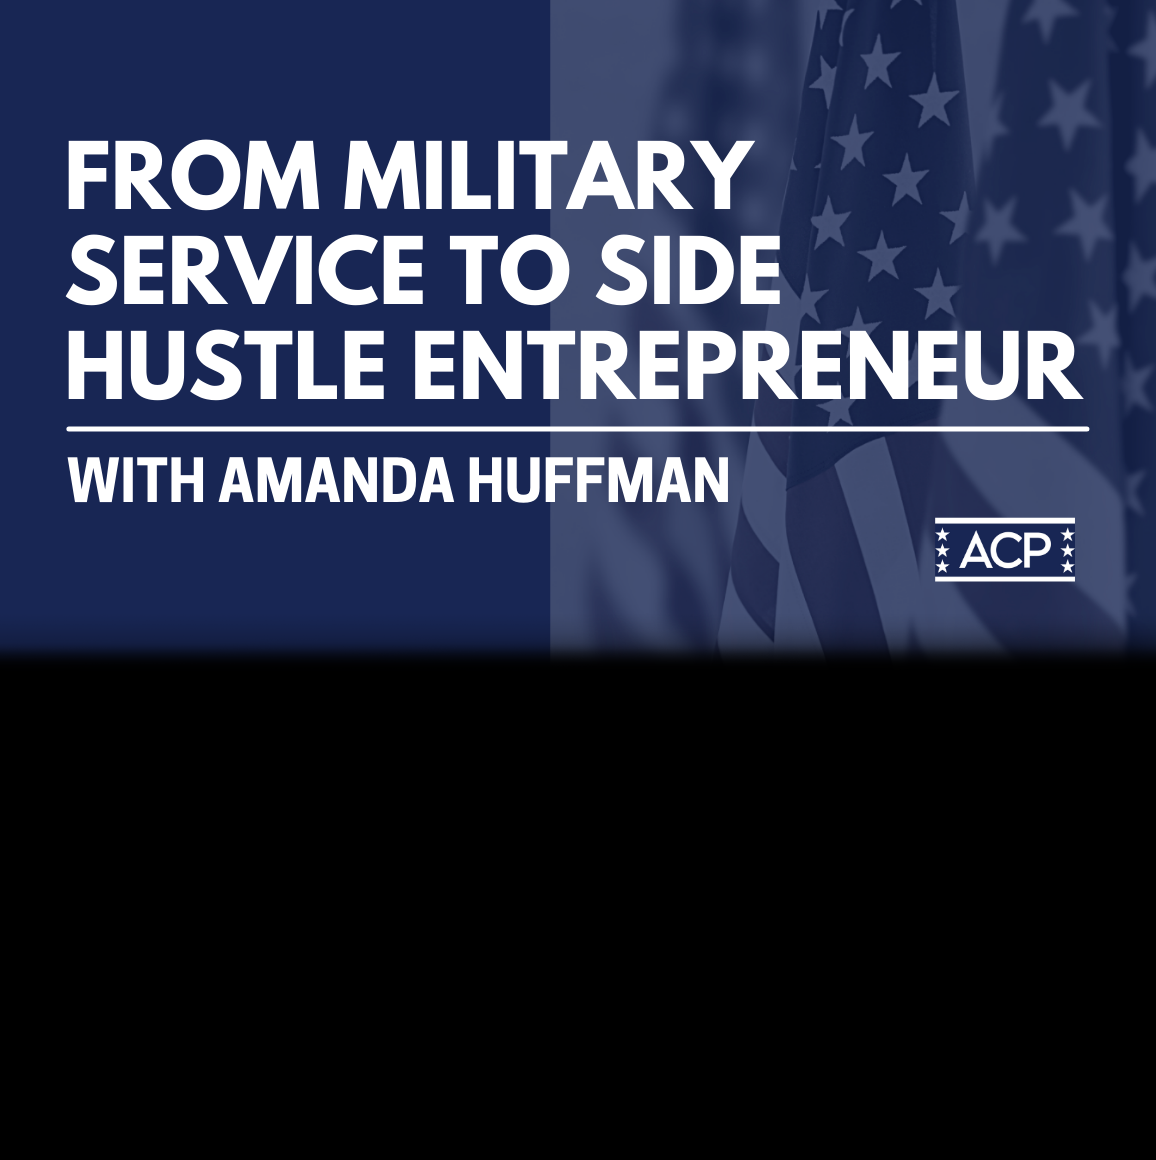 From Military Service to Side Hustle Entrepreneur